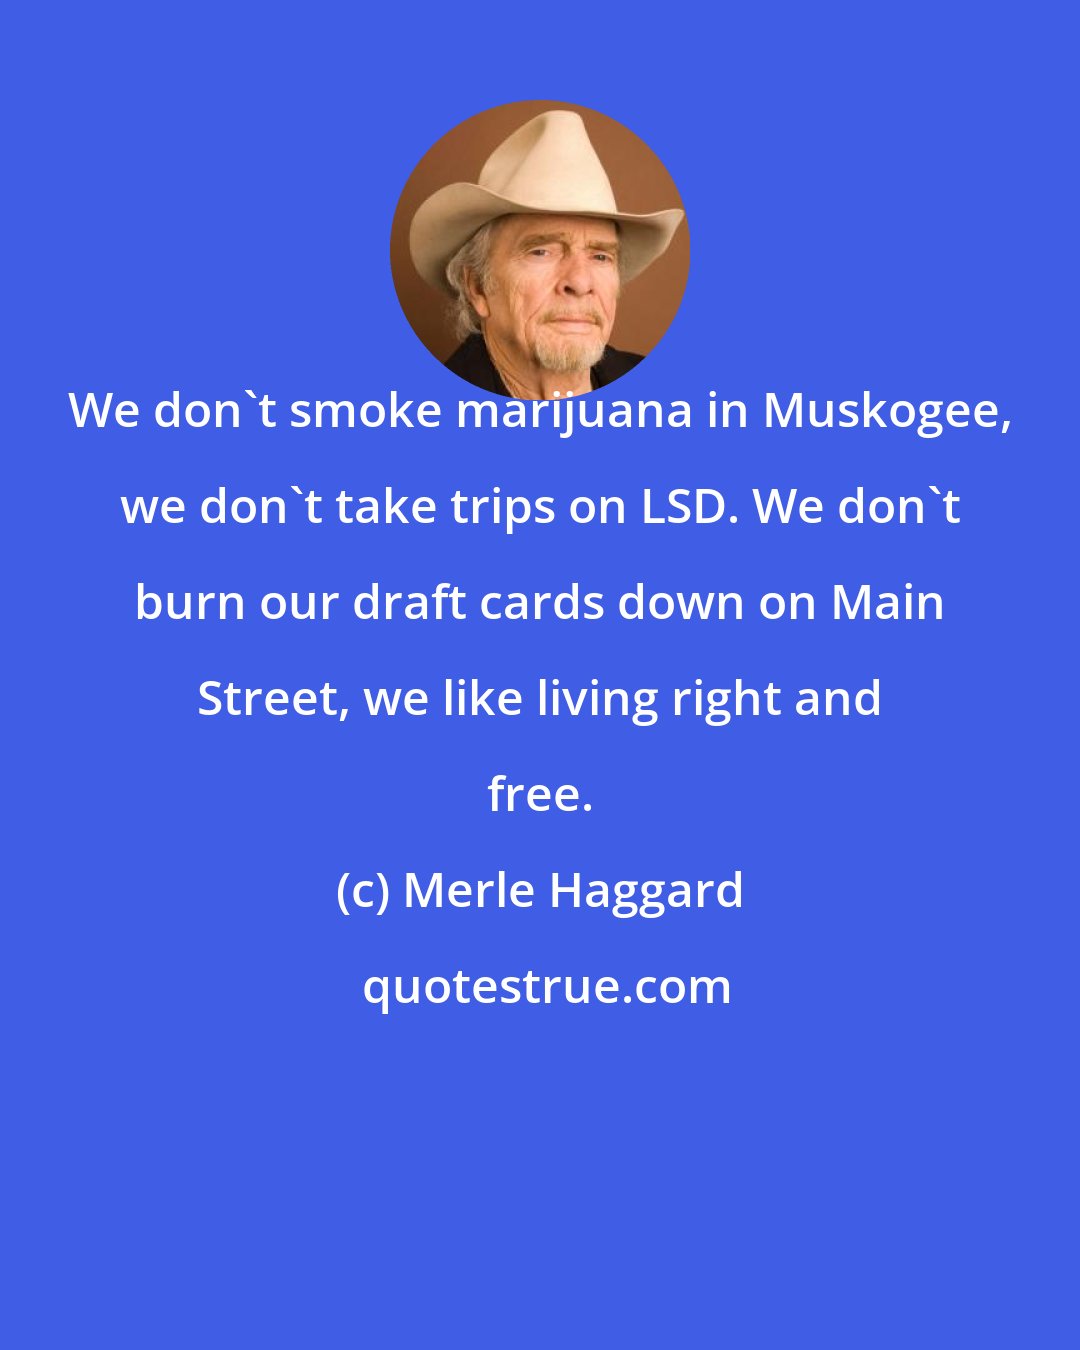 Merle Haggard: We don't smoke marijuana in Muskogee, we don't take trips on LSD. We don't burn our draft cards down on Main Street, we like living right and free.